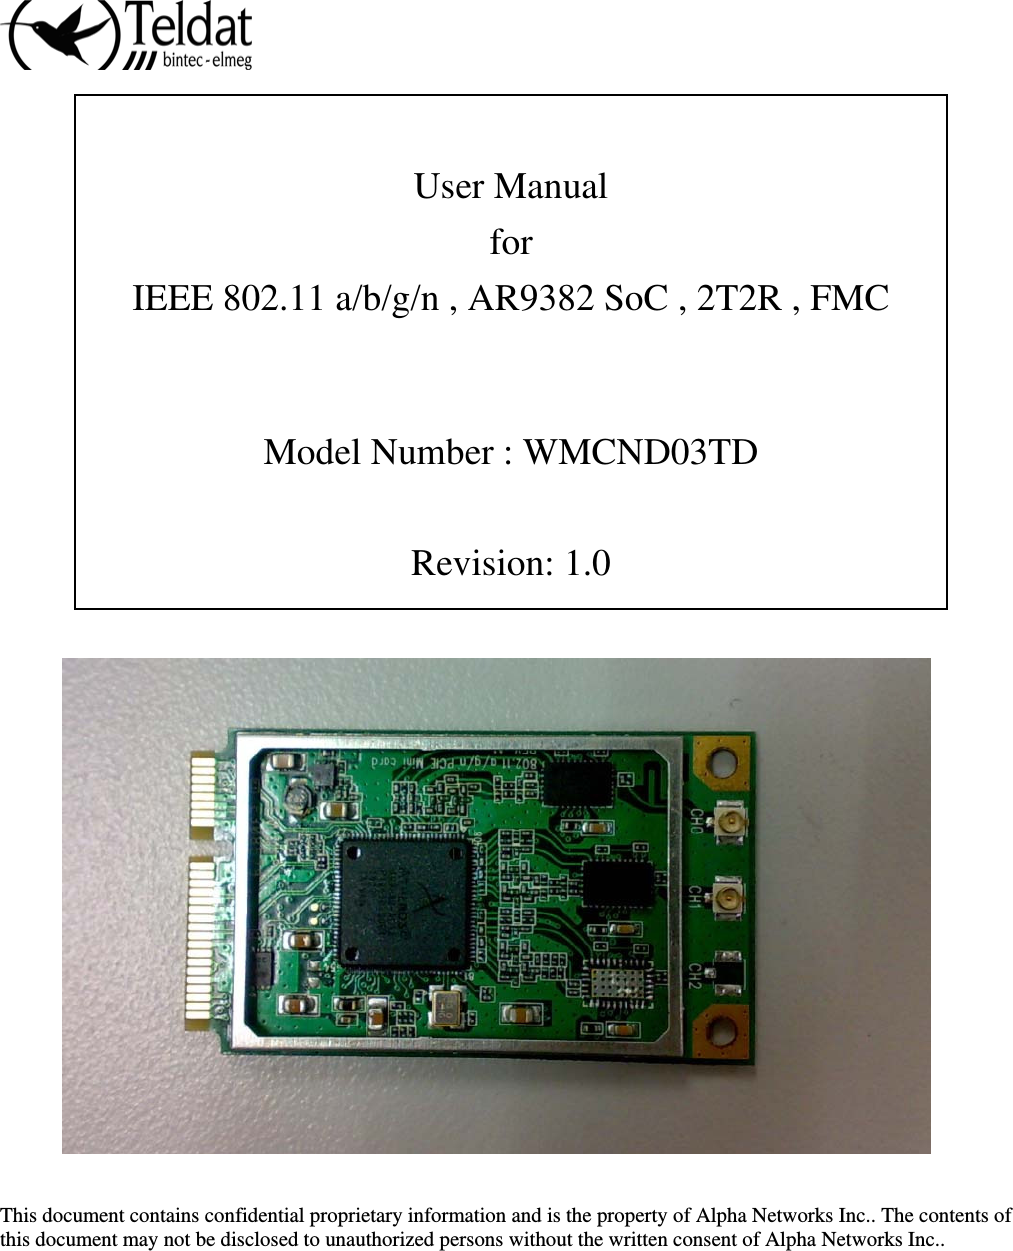    User Manual  for IEEE 802.11 a/b/g/n , AR9382 SoC , 2T2R , FMC     Model Number : WMCND03TD  Revision: 1.0       This document contains confidential proprietary information and is the property of Alpha Networks Inc.. The contents of this document may not be disclosed to unauthorized persons without the written consent of Alpha Networks Inc..      